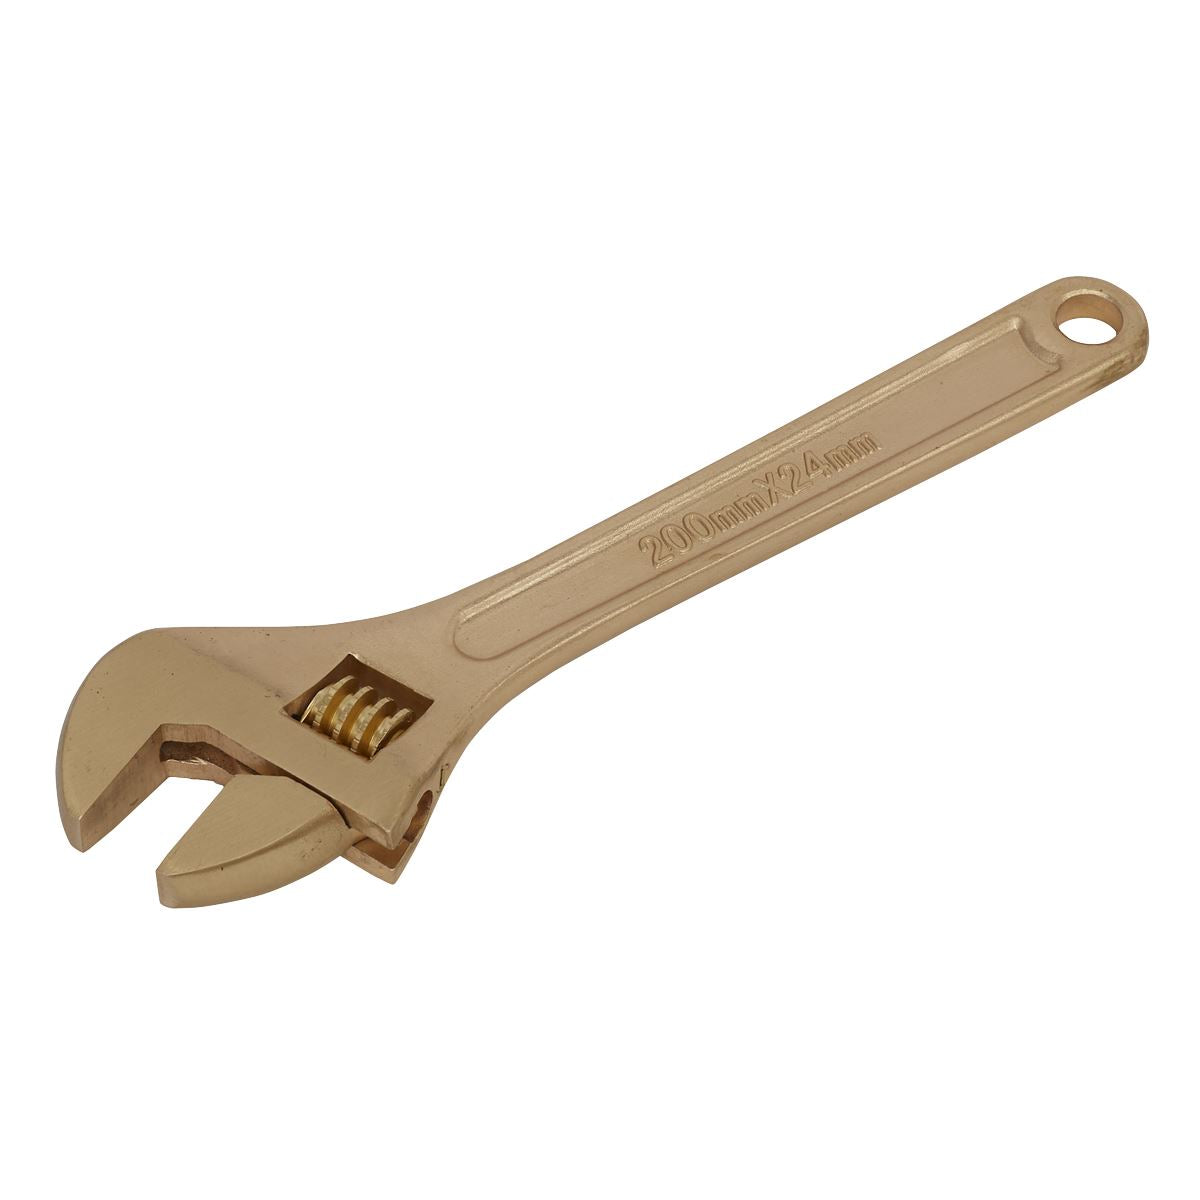 Sealey Adjustable Wrench 200mm - Non-Sparking NS066